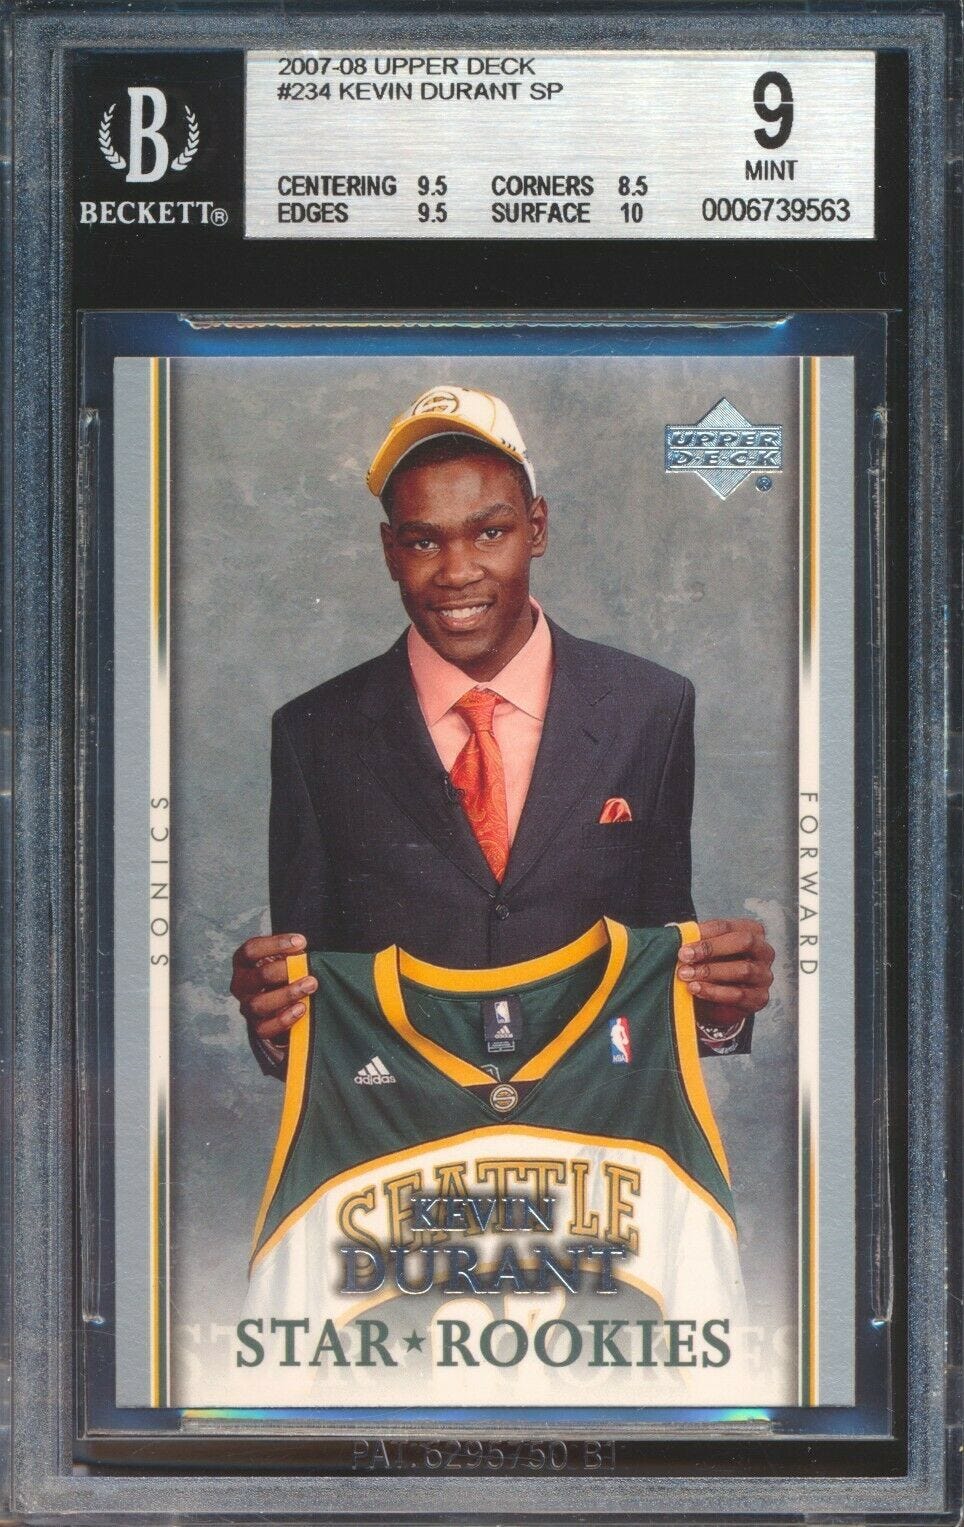 Image 1 - KEVIN-DURANT-2007-08-Upper-Deck-Star-Rookies-234-RC-Rookie-SP-BGS-9-MINT